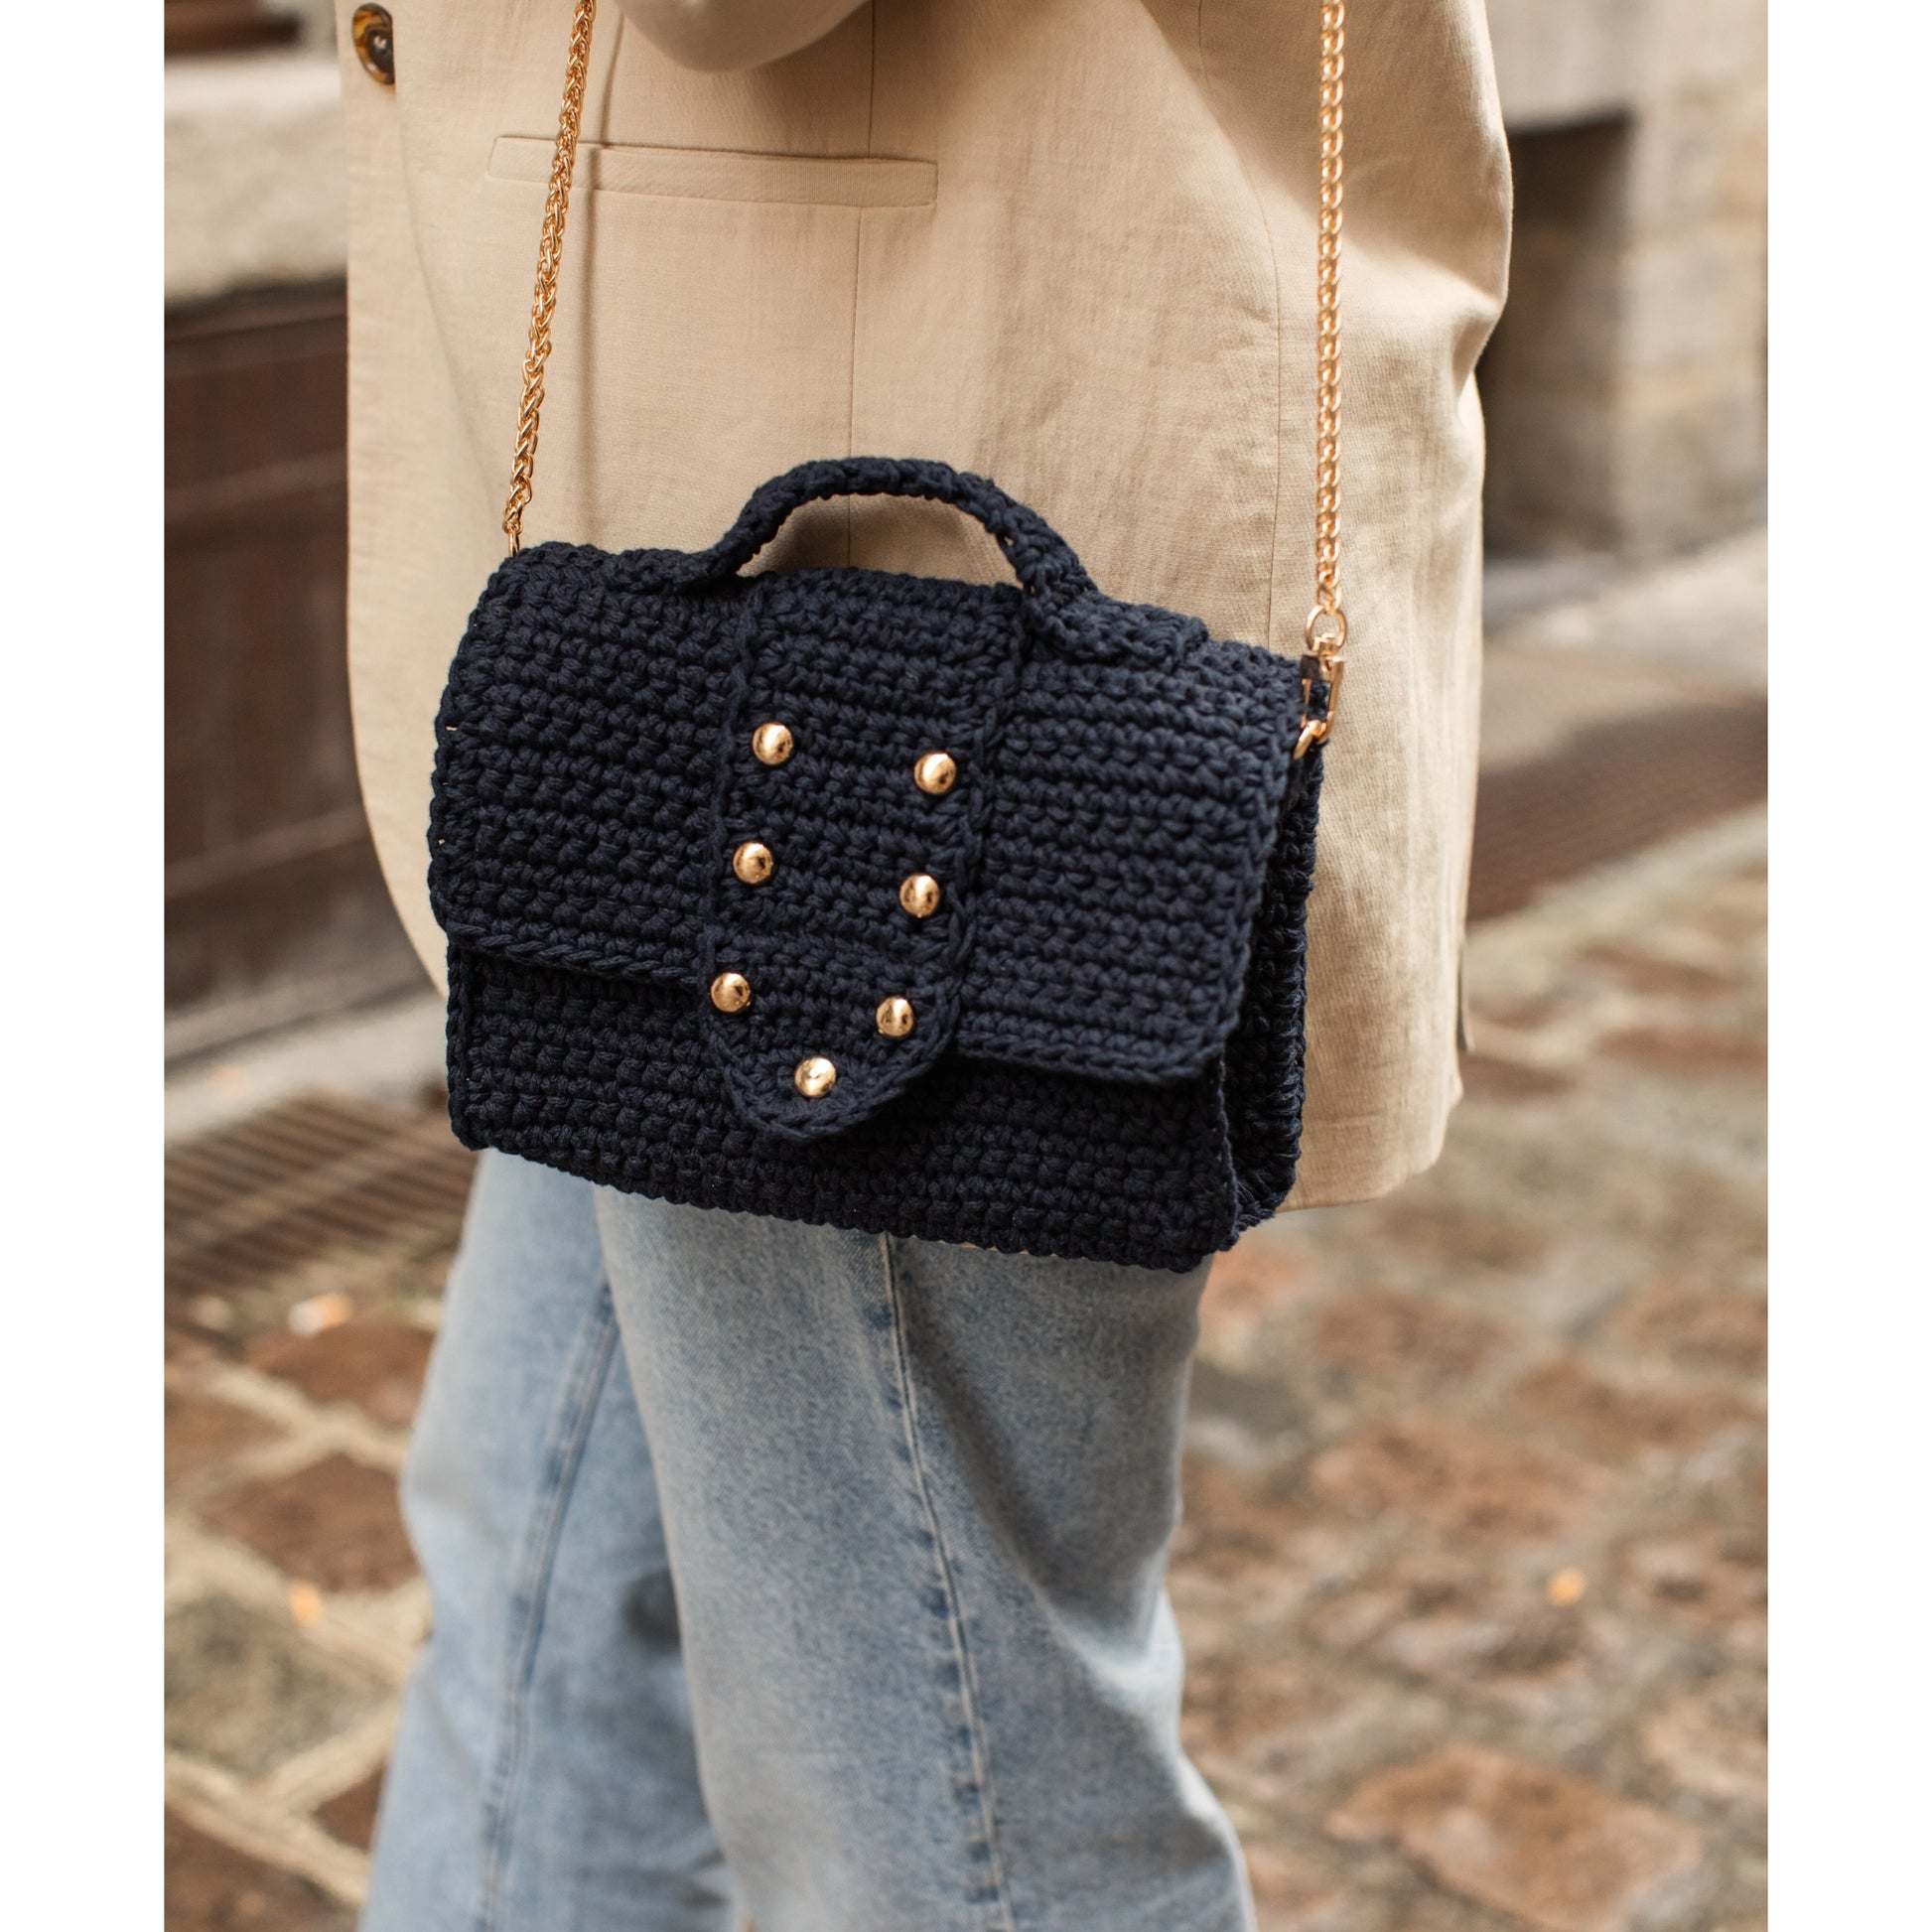 sac bandouliere marine femme luxe pas cher